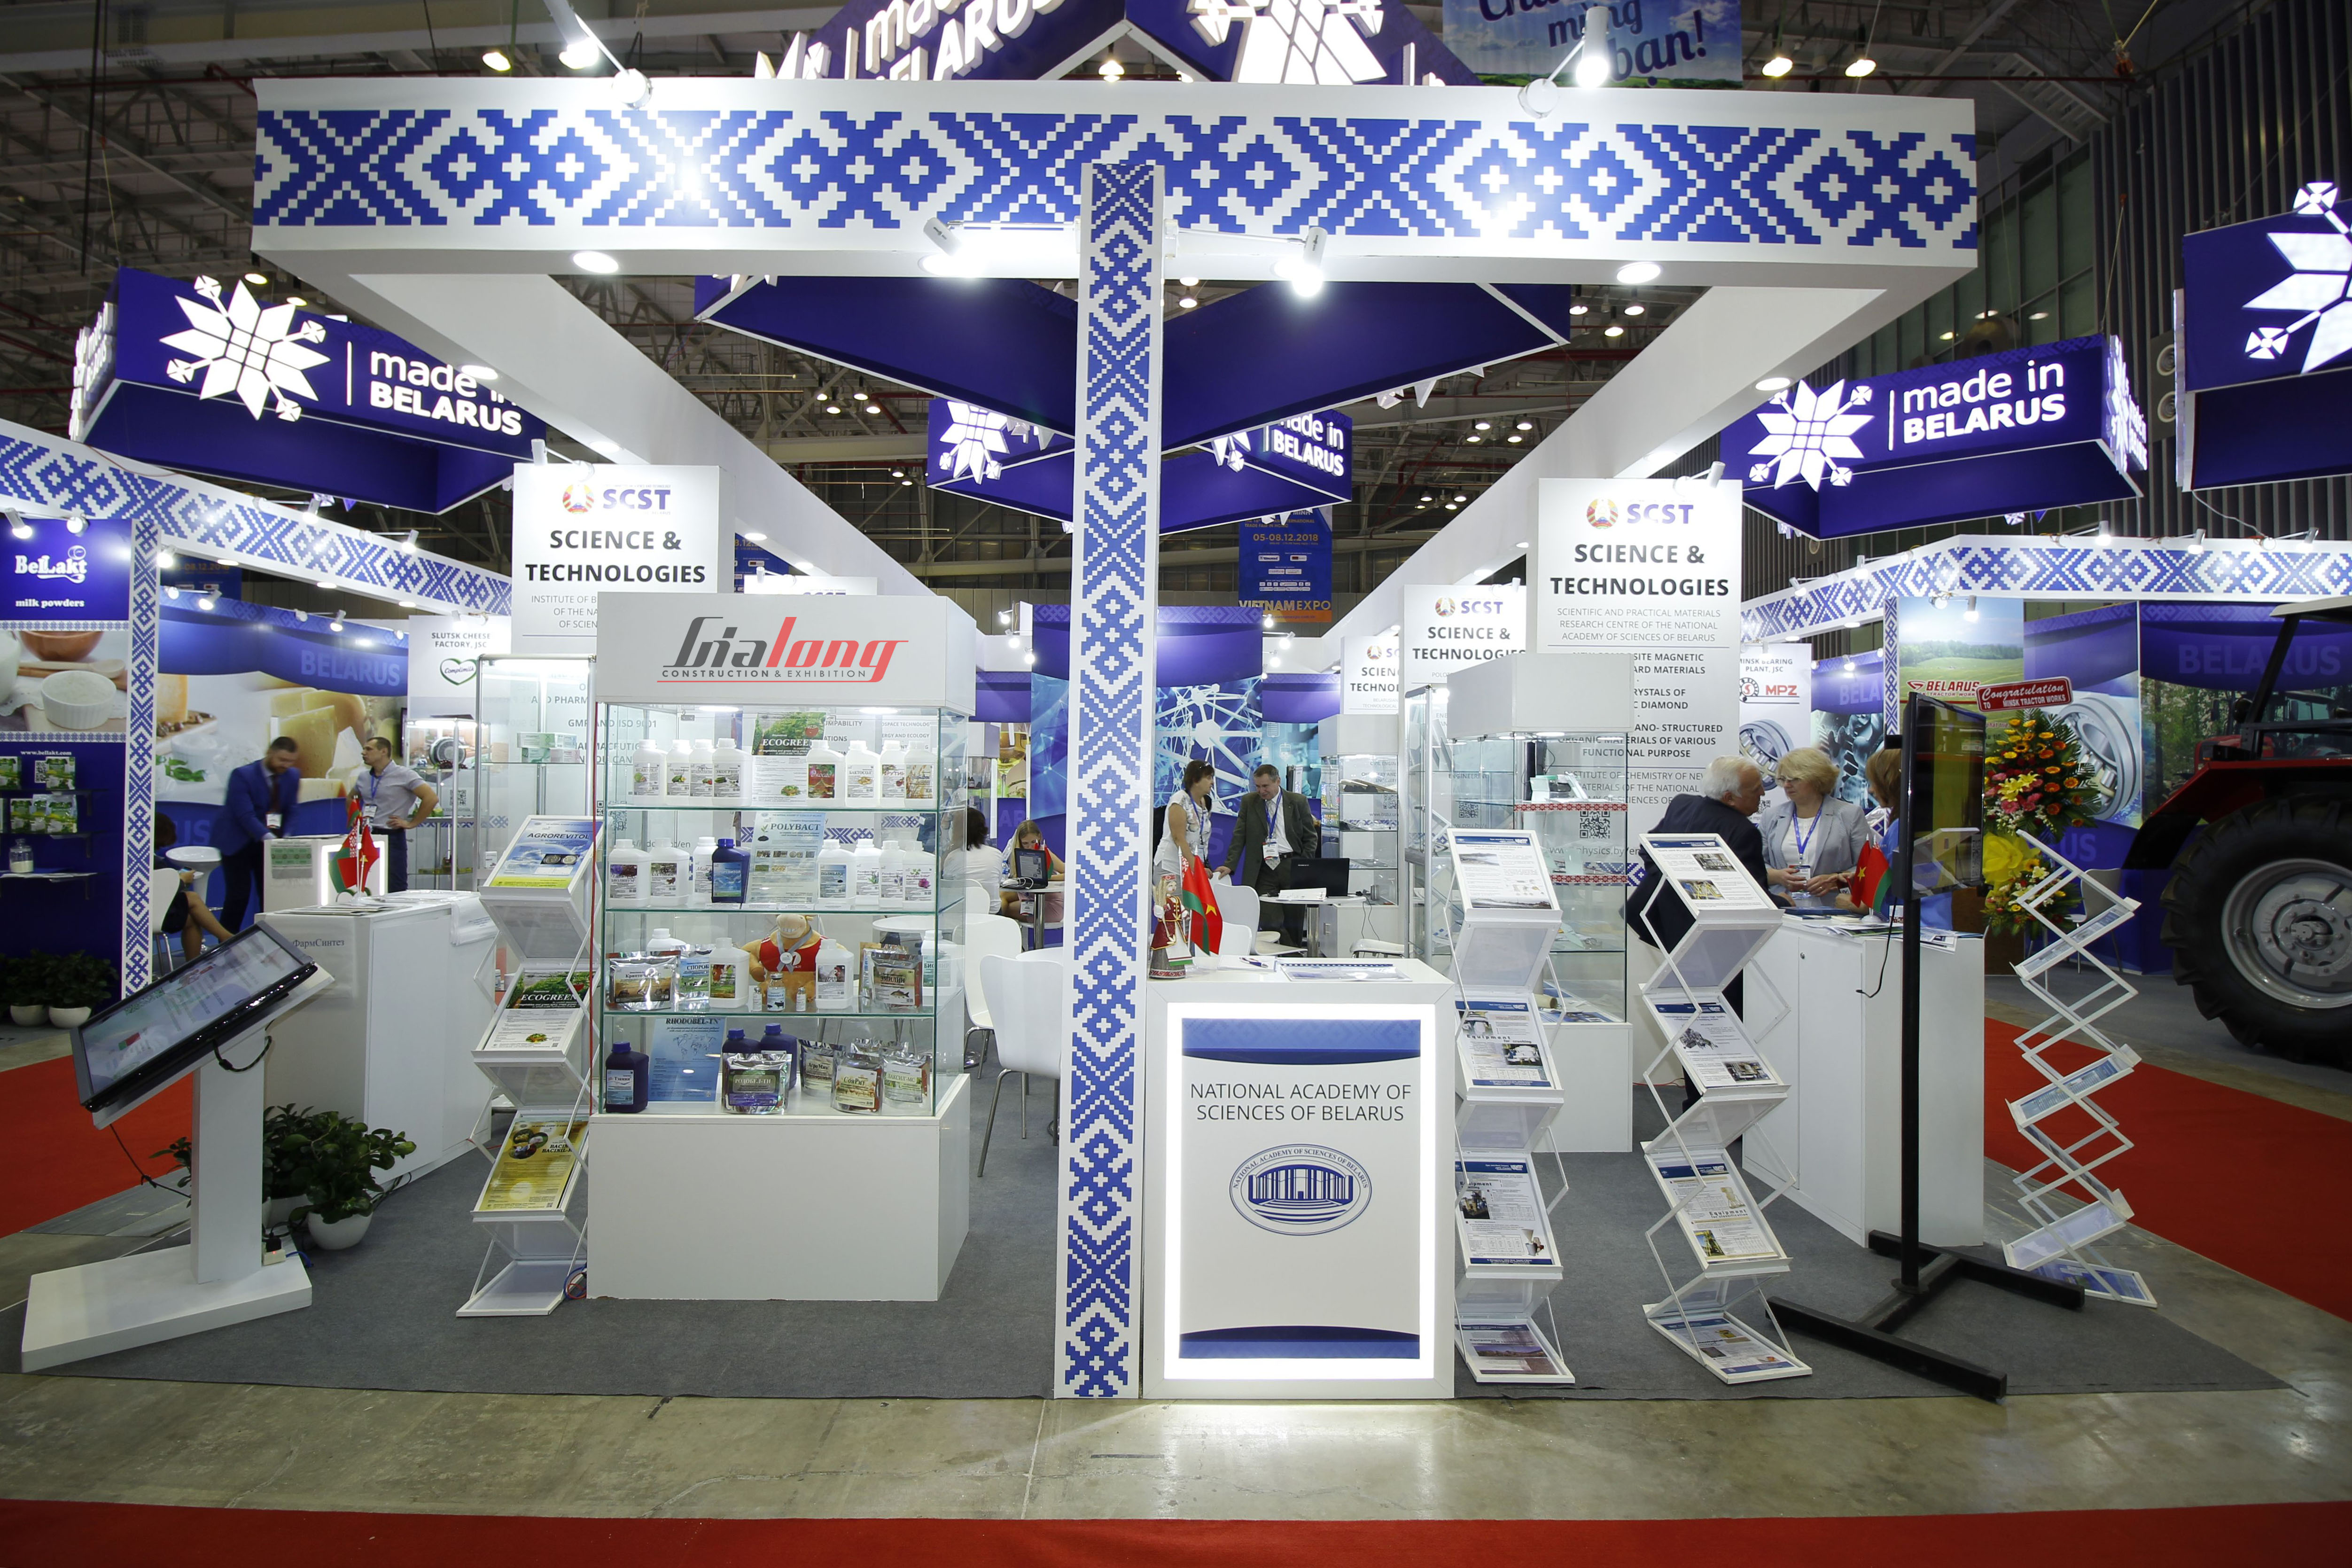 BELARUS - Design and construction of exhibition booth VIETNAM EXPO 2018